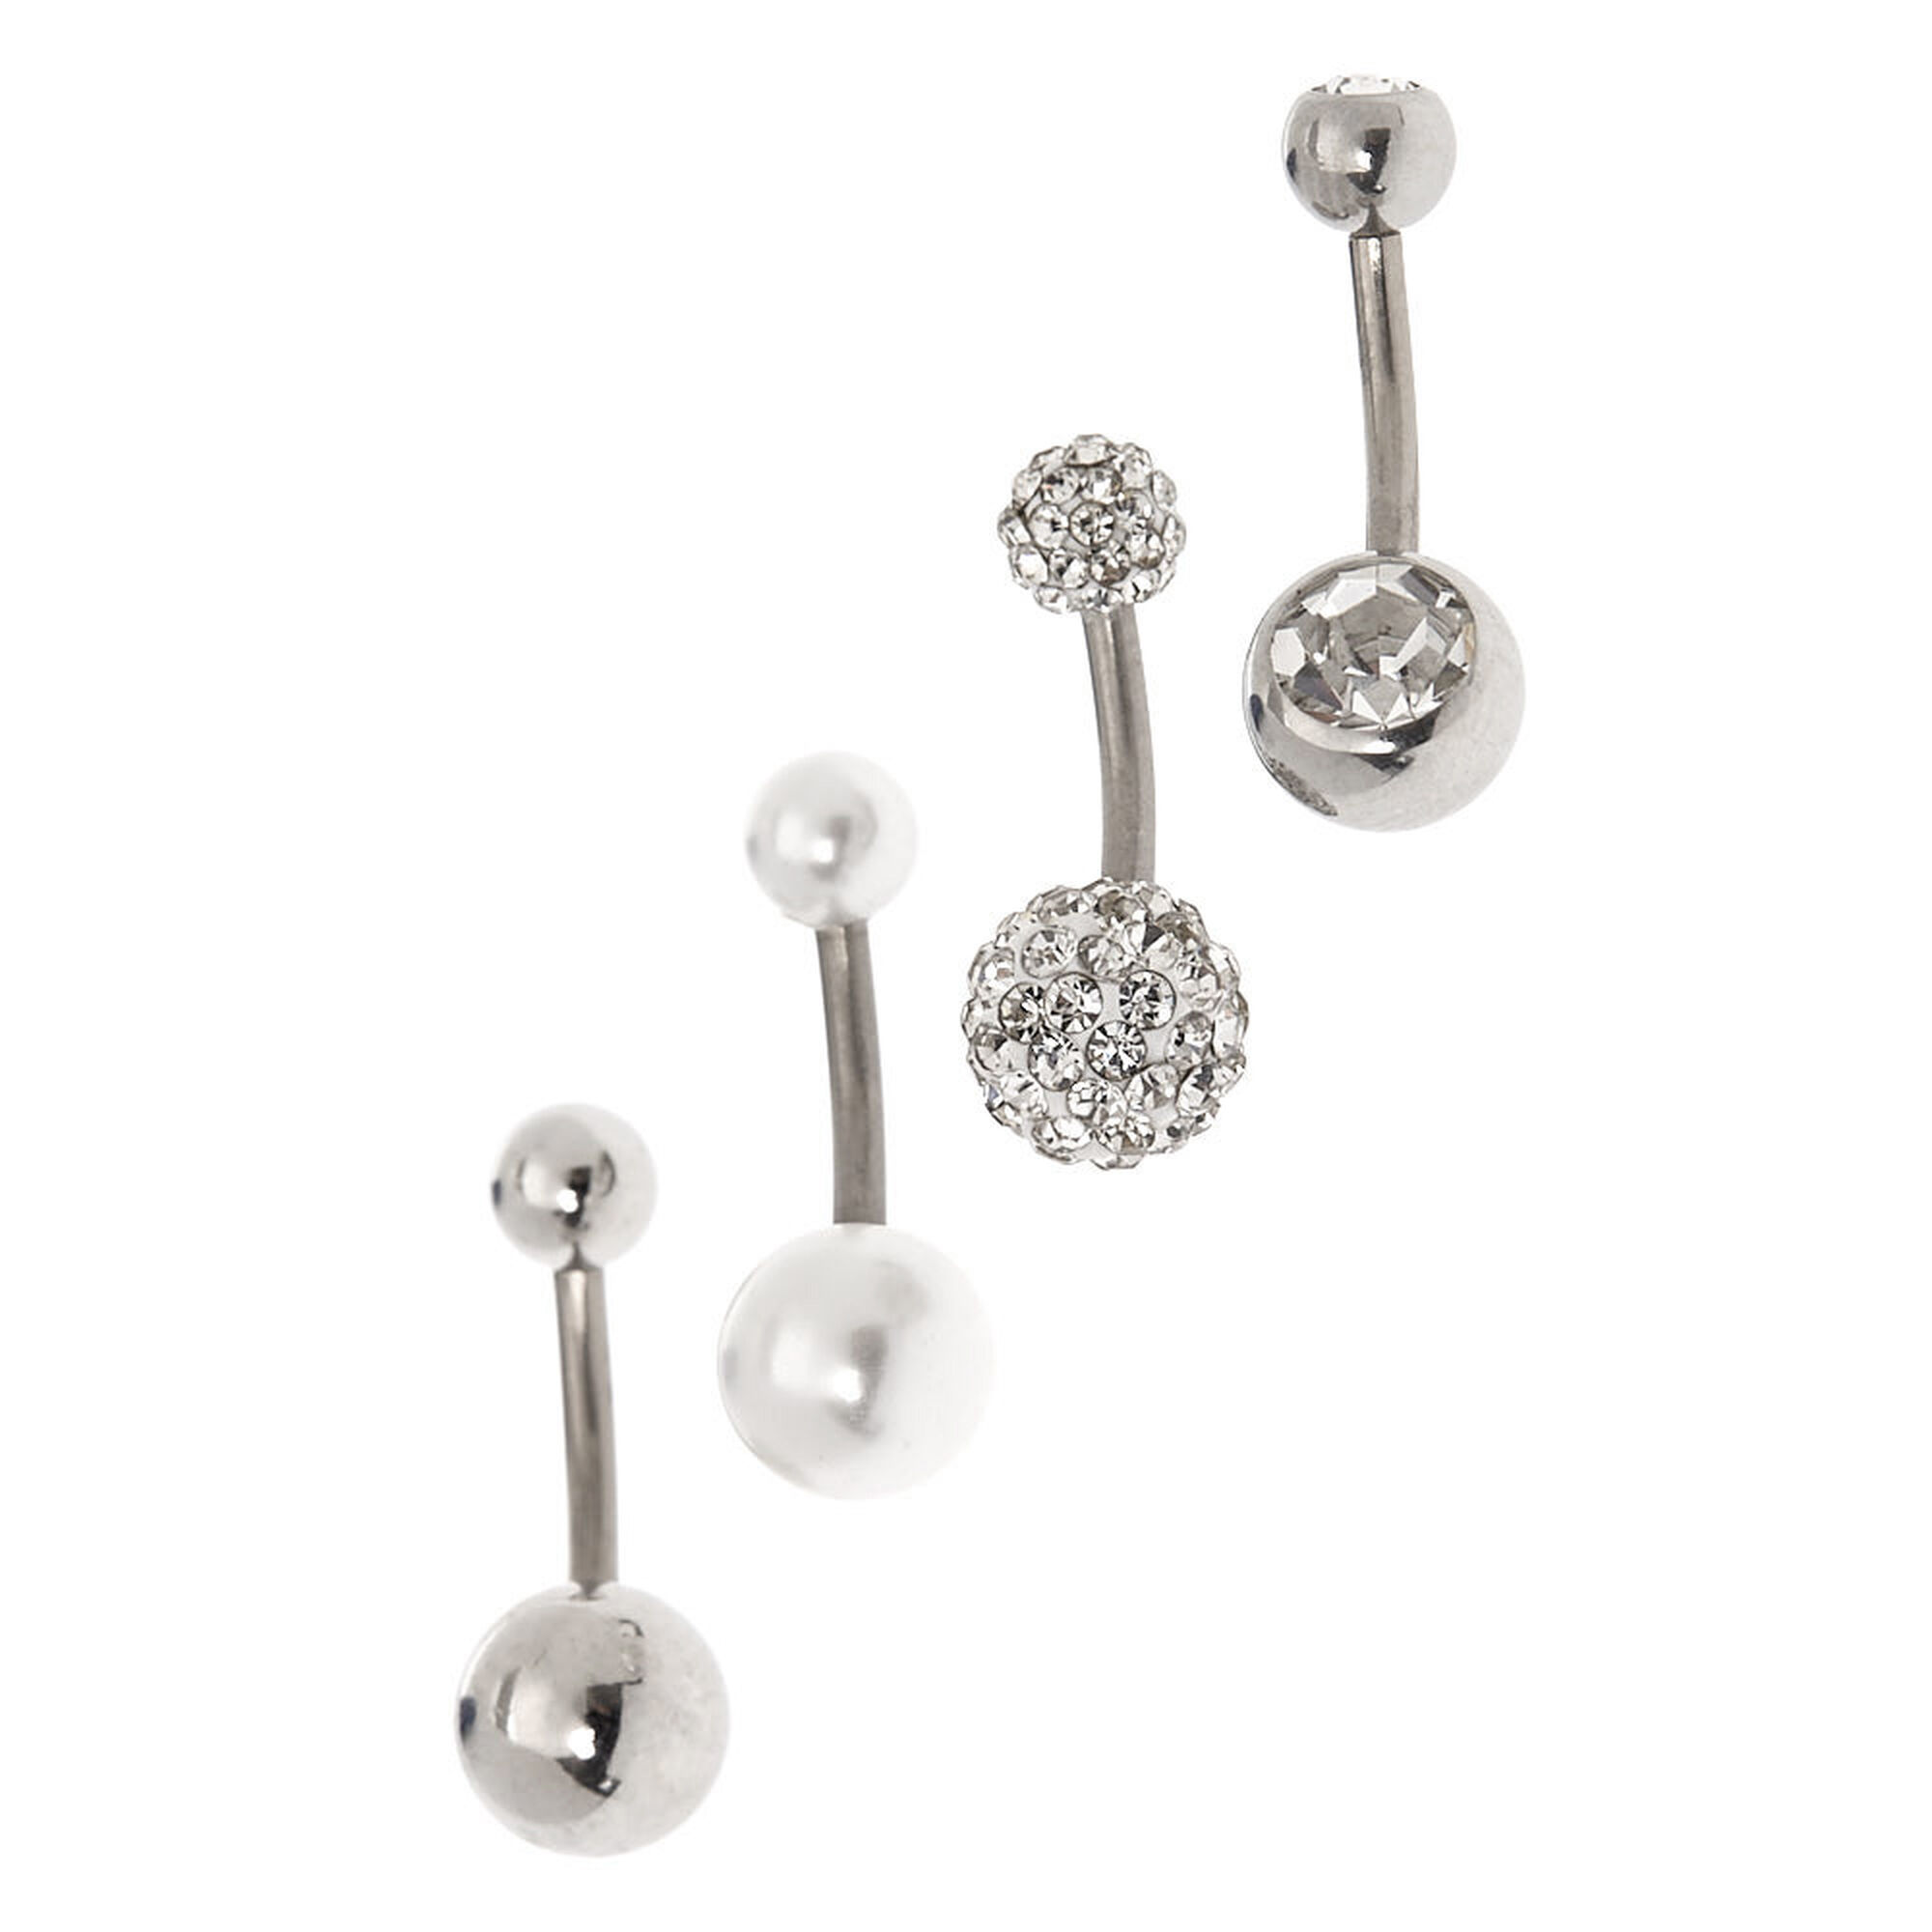 View Claires Tone Titanium 14G Mixed Crystal Pearl Belly Rings 4 Pack Silver information